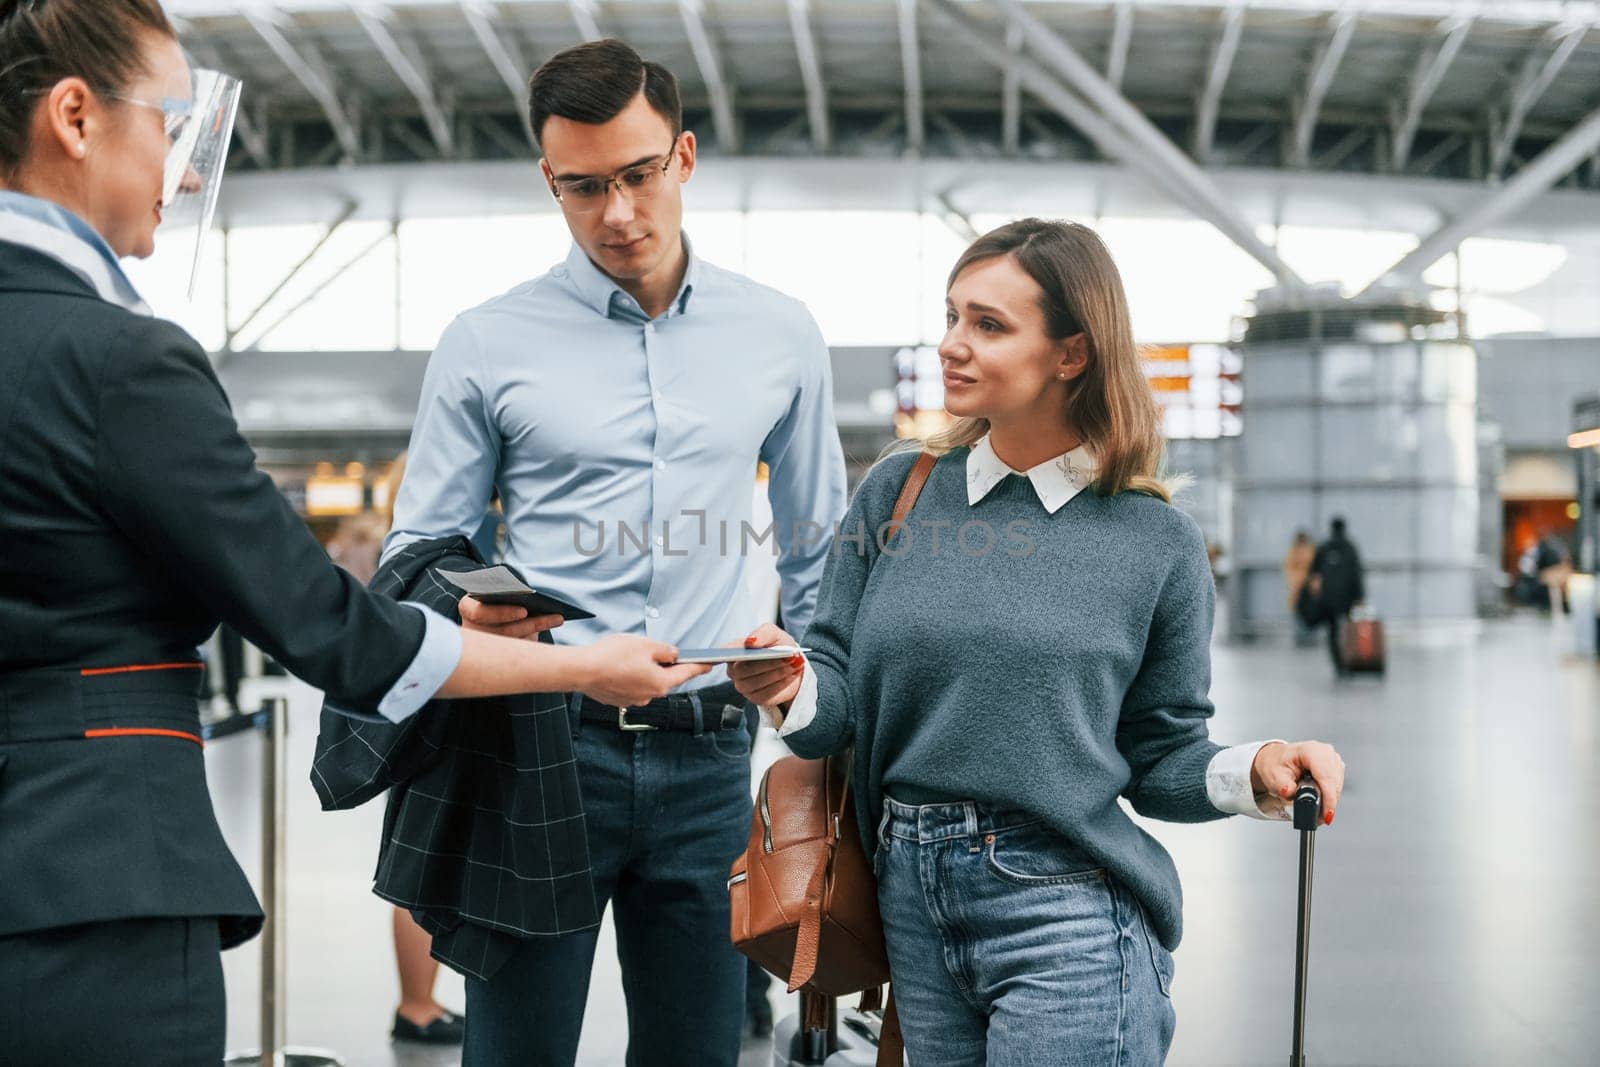 Checking documents at the entrance. Young couple is in the airport together by Standret